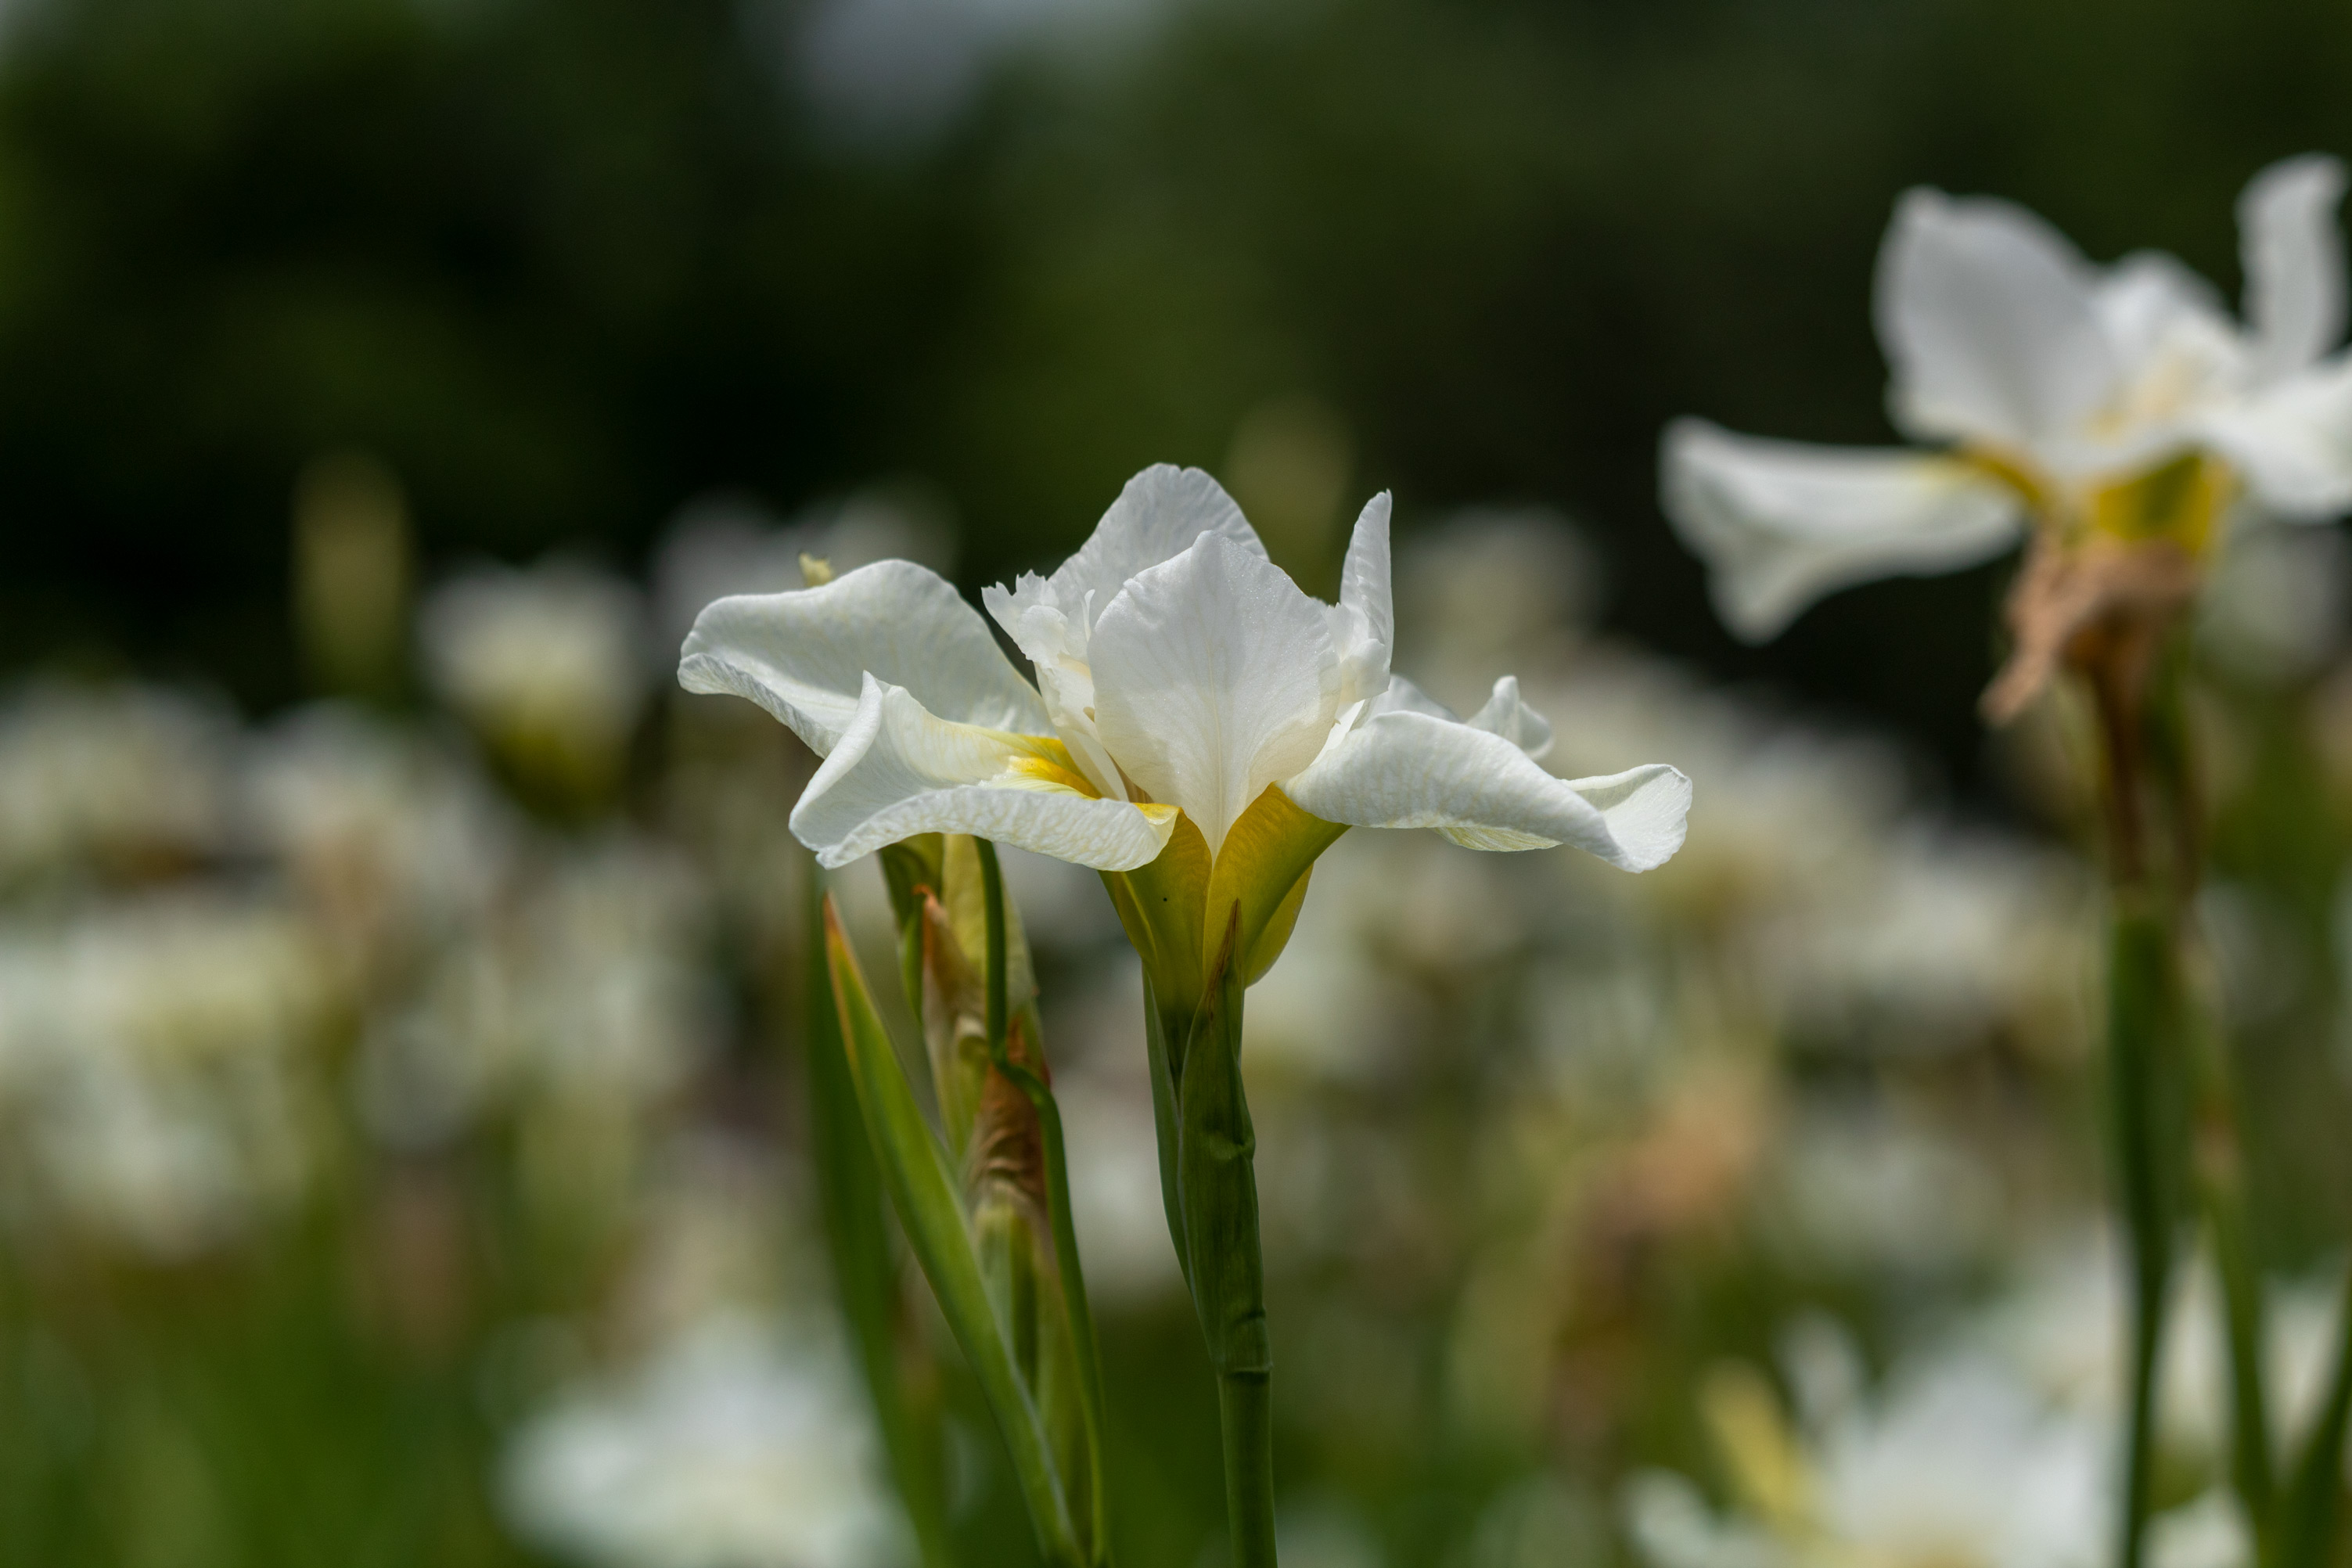 White iris in focus in front of many out-of-focus white irises